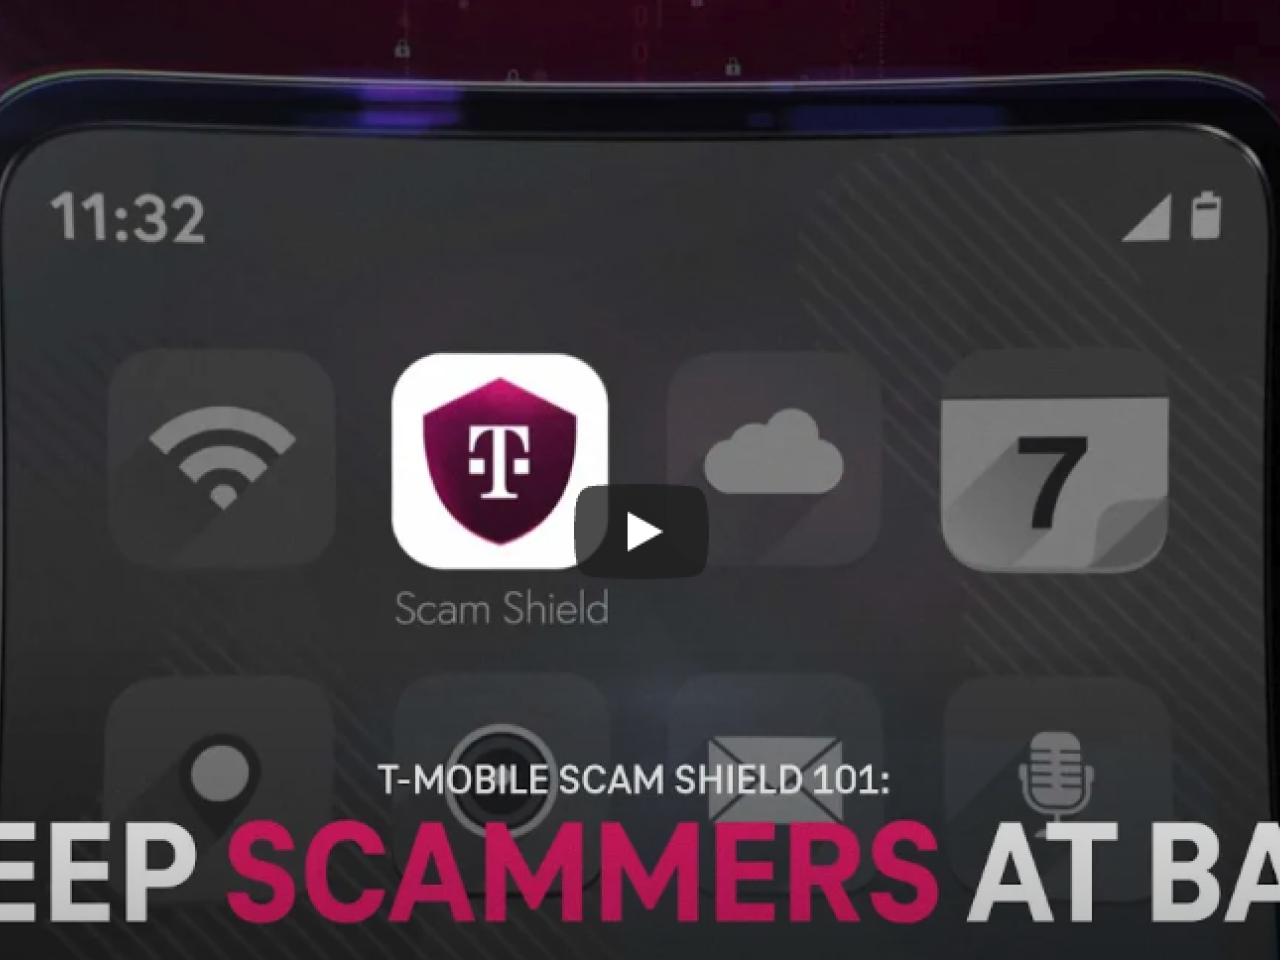 Smartphone screen: Keep Scammers at Bay